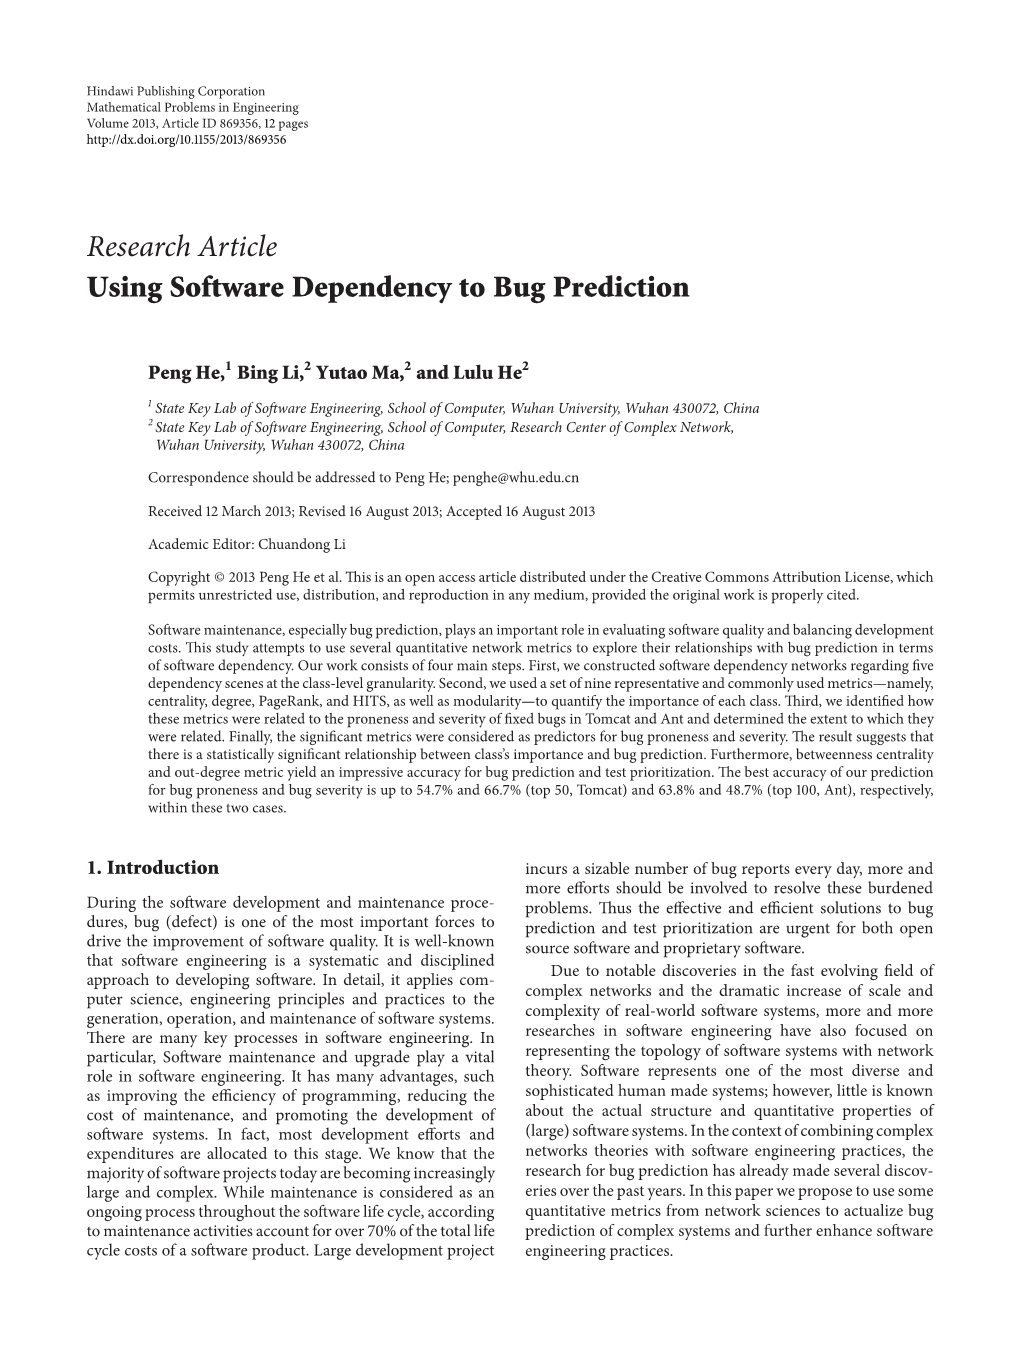 Using Software Dependency to Bug Prediction